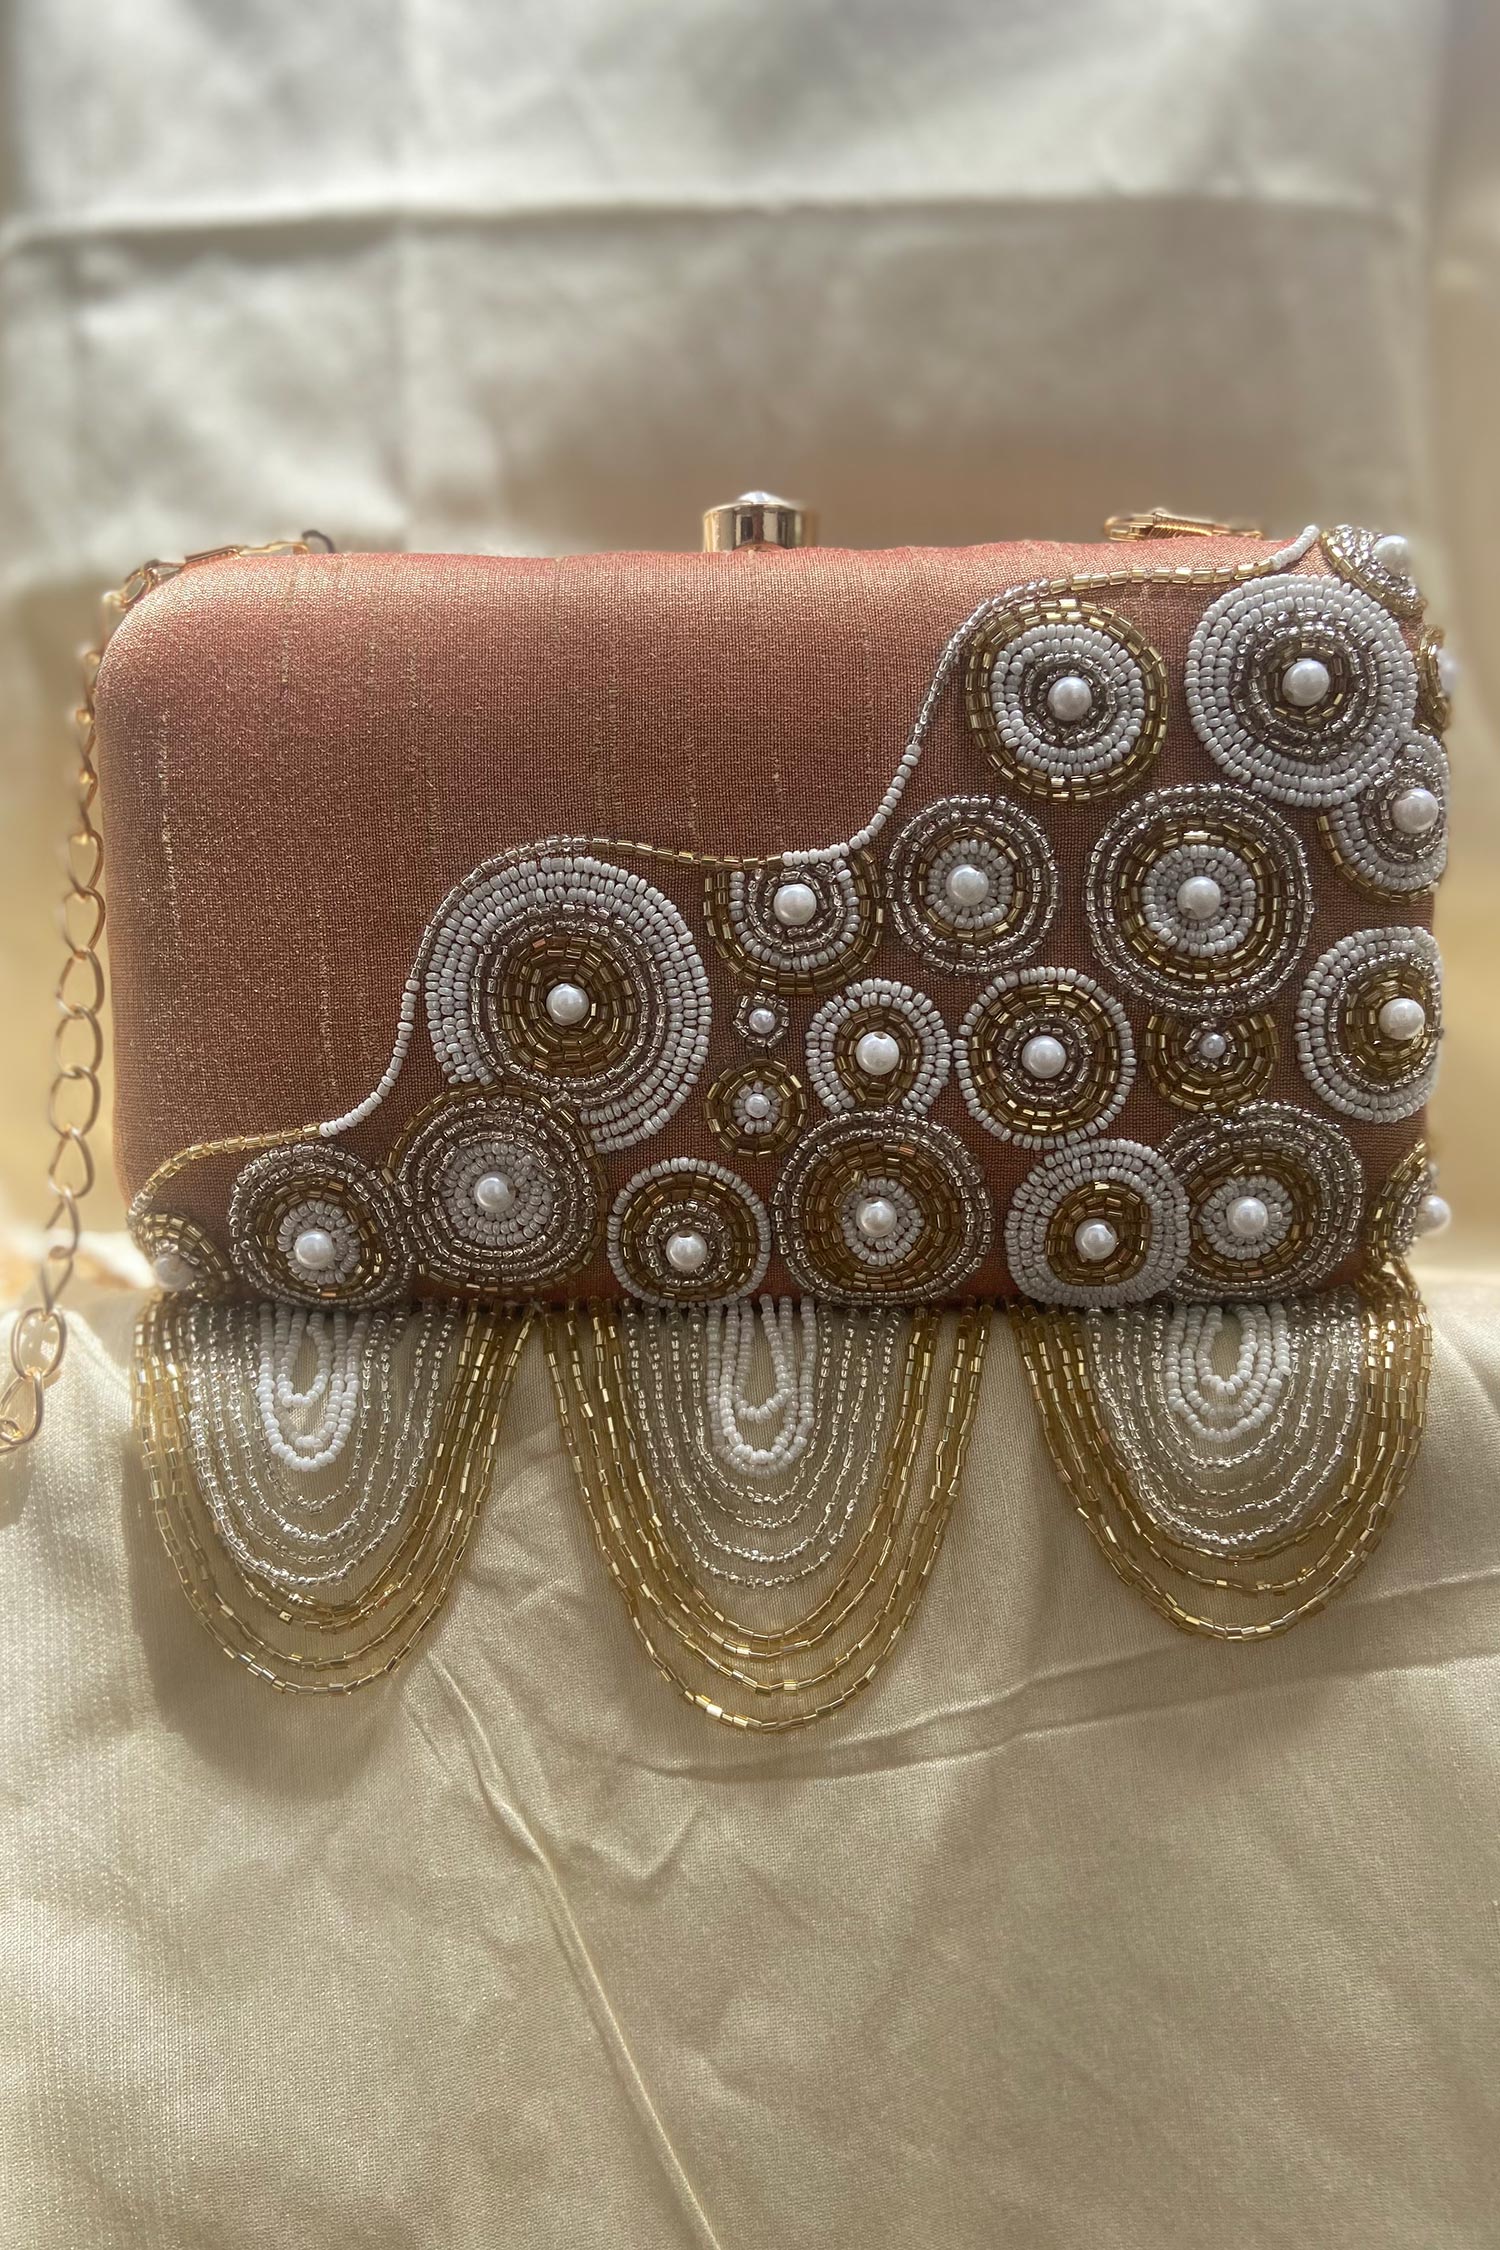 Pearl Potli Bags, Indian Wedding Accessory, Bridal Gifts, Evening Bags and  Clutches, Pearl Embellished, Clutch, G… | Vintage evening bags, Potli bags,  Beaded purses